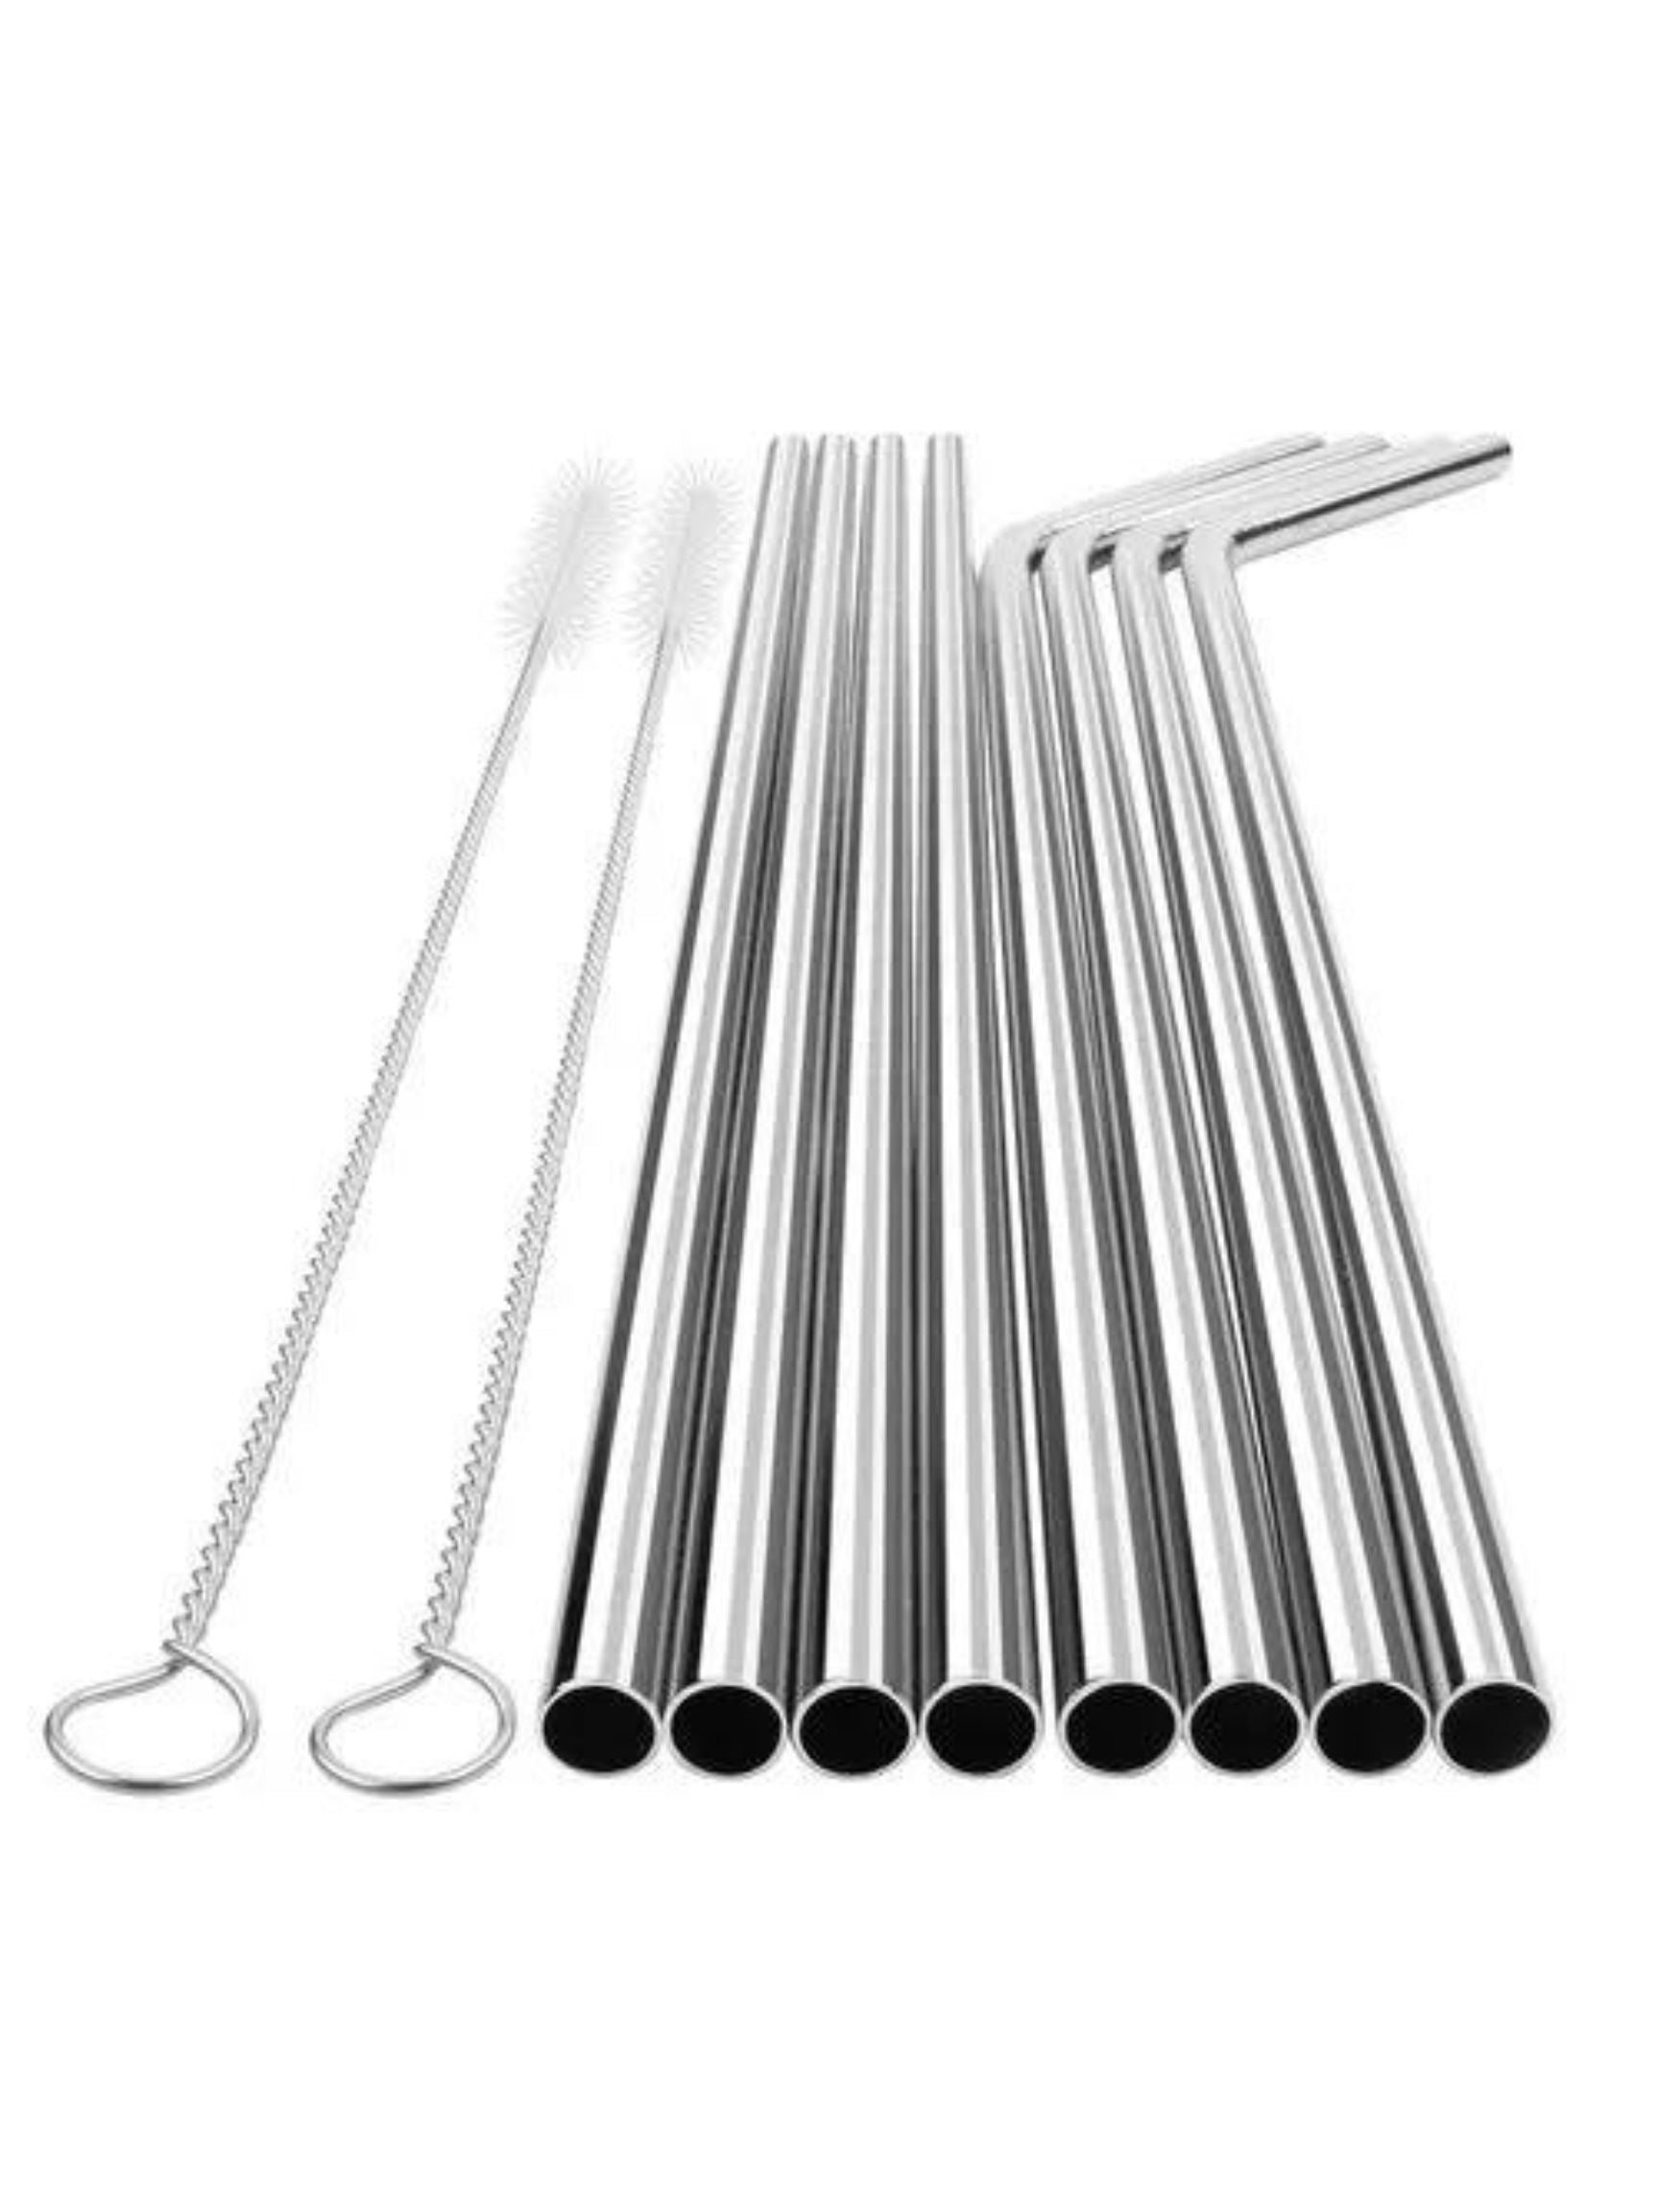 ZogeeZ 20 piece Stainless Steel Straws 10.5" Reusable Drinking Straws & Cleaning Brushes Set - General Wholesale Direct